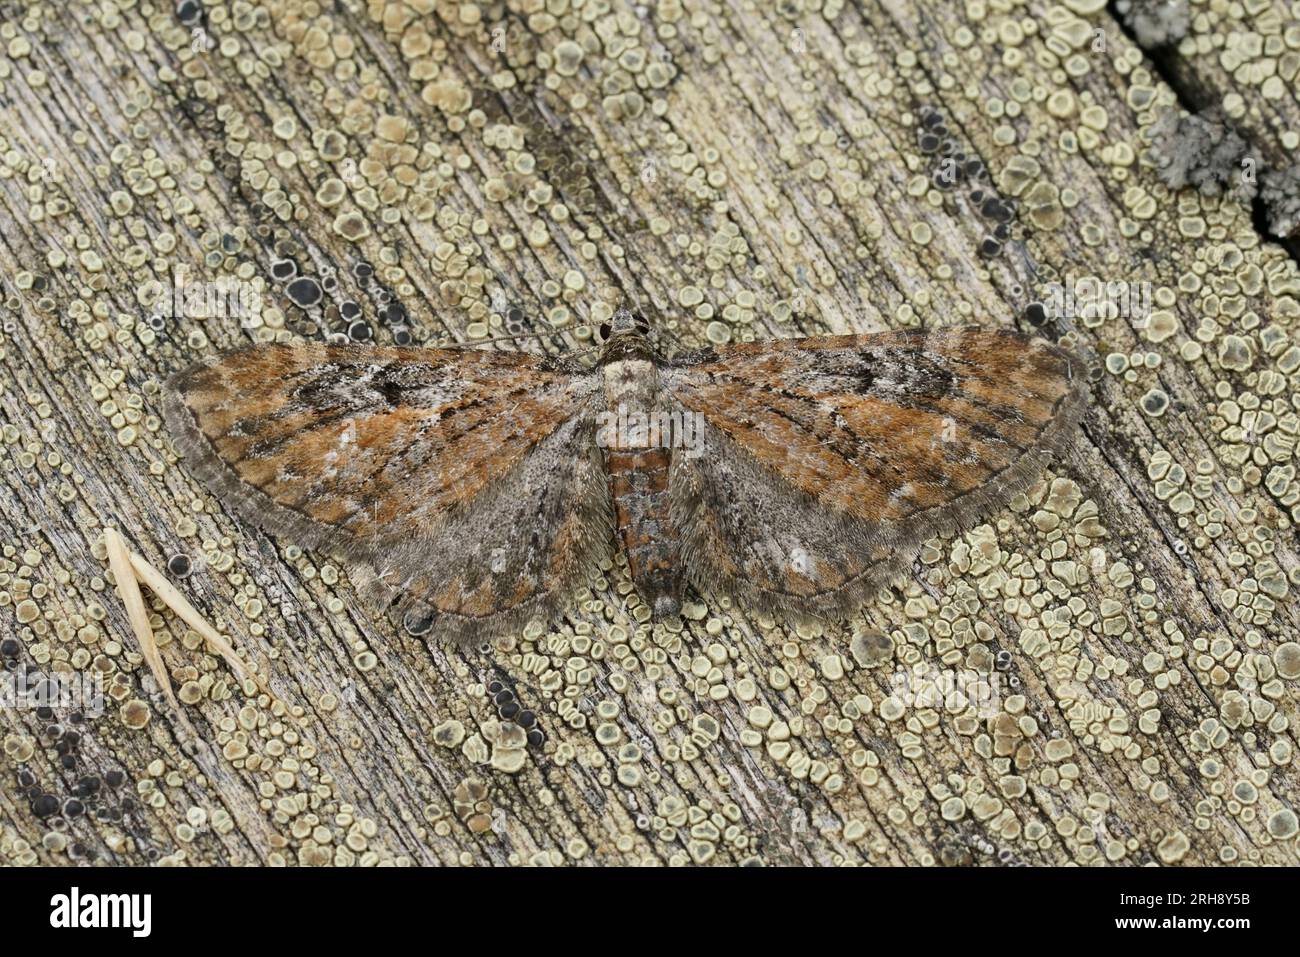 Natural closeup on a well camouflaged Tawny Speckled Pug , Eupithecia icterata sitting with spread wings on wood Stock Photo